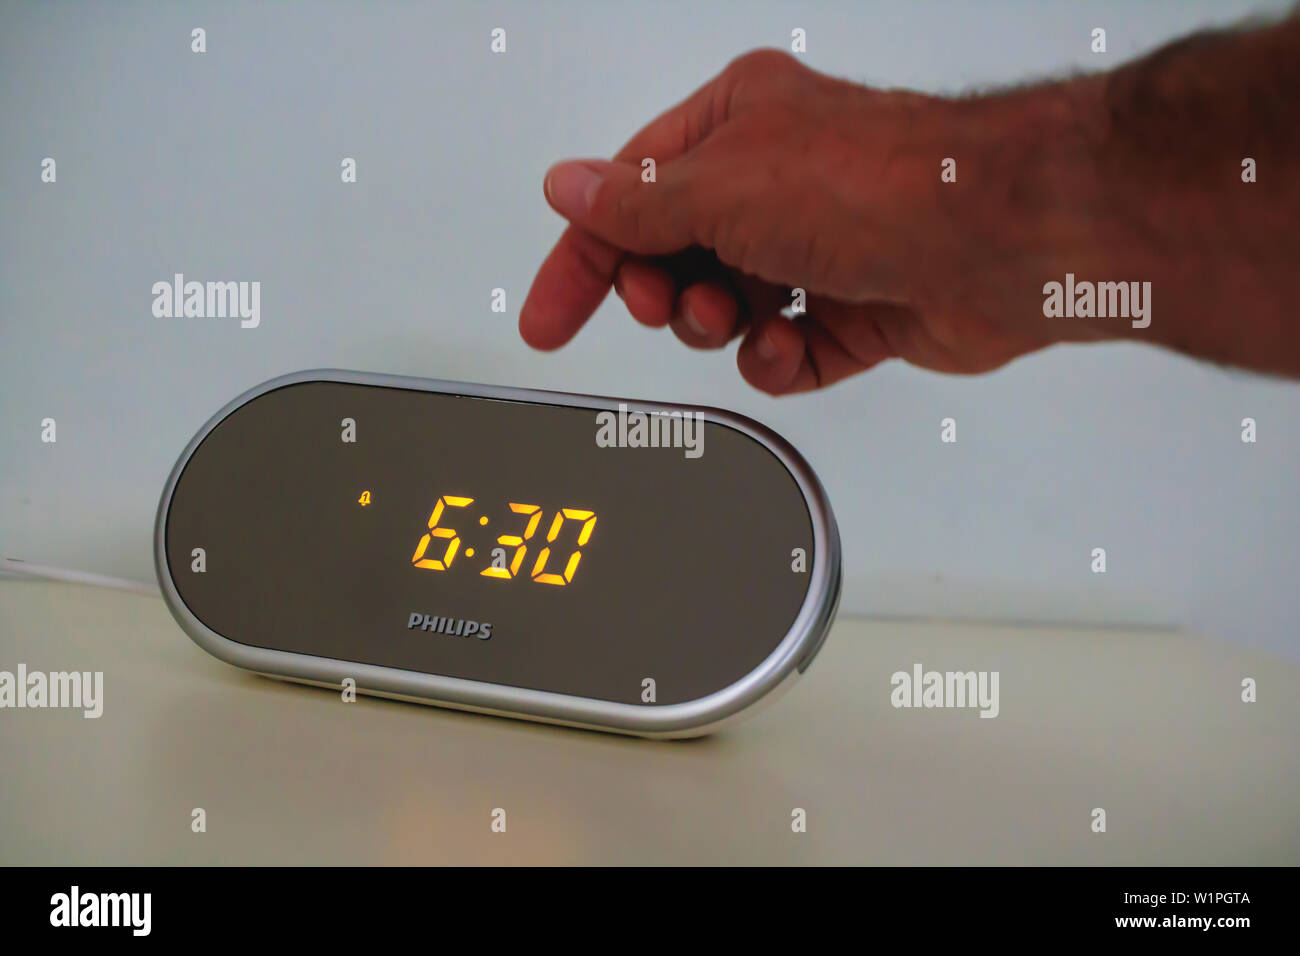 A hand switching off an early morning call on digital alarm clock radio Stock Photo - Alamy